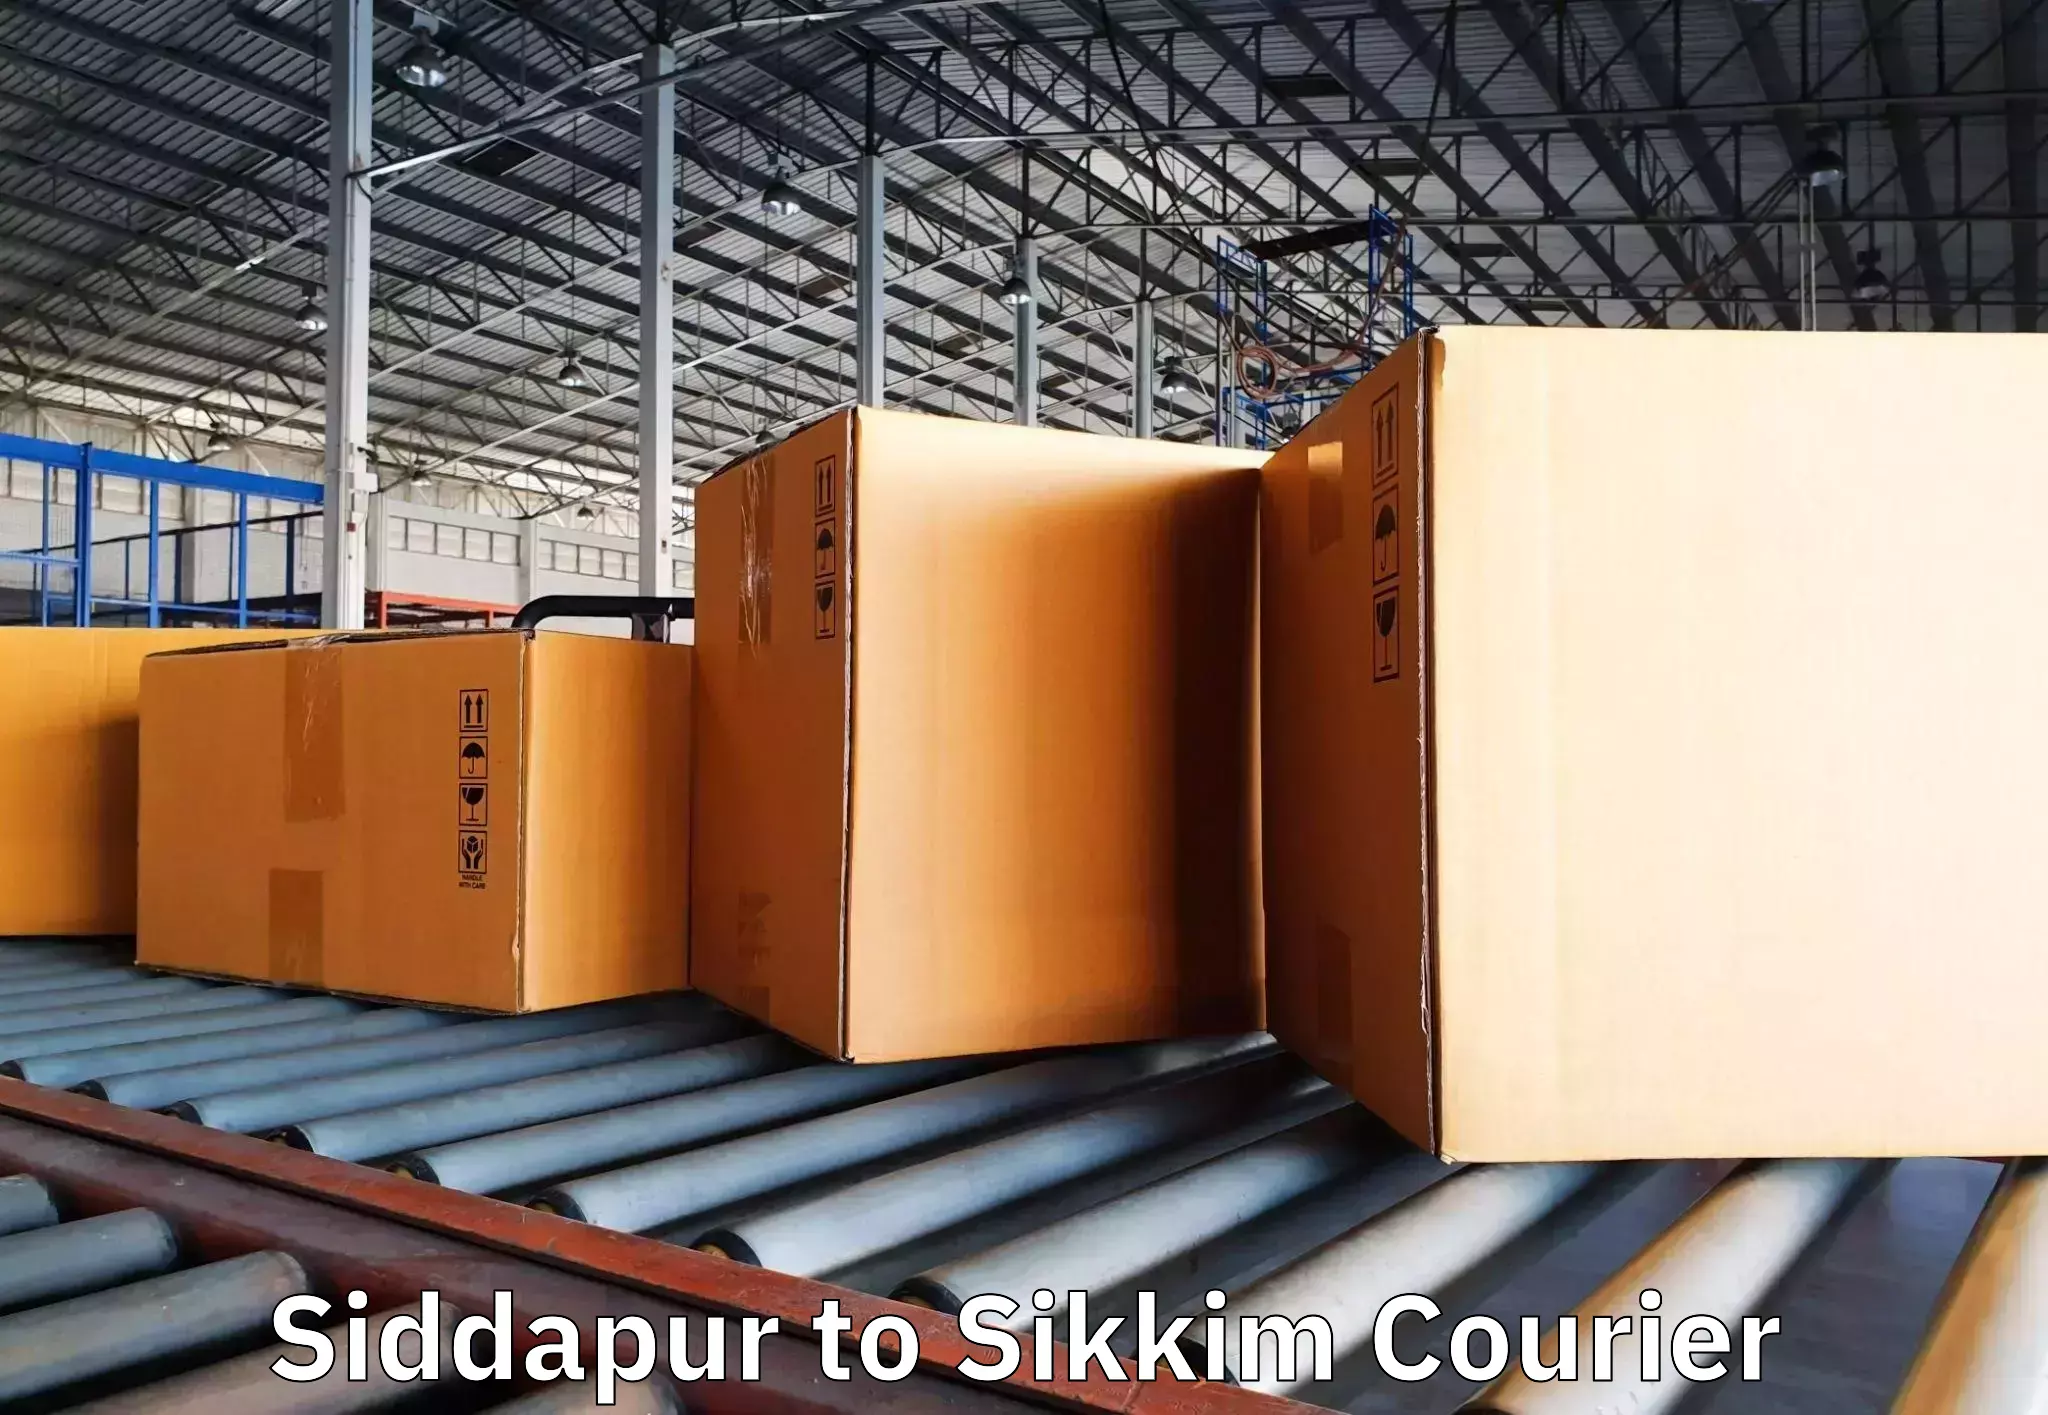 Professional moving company Siddapur to Sikkim